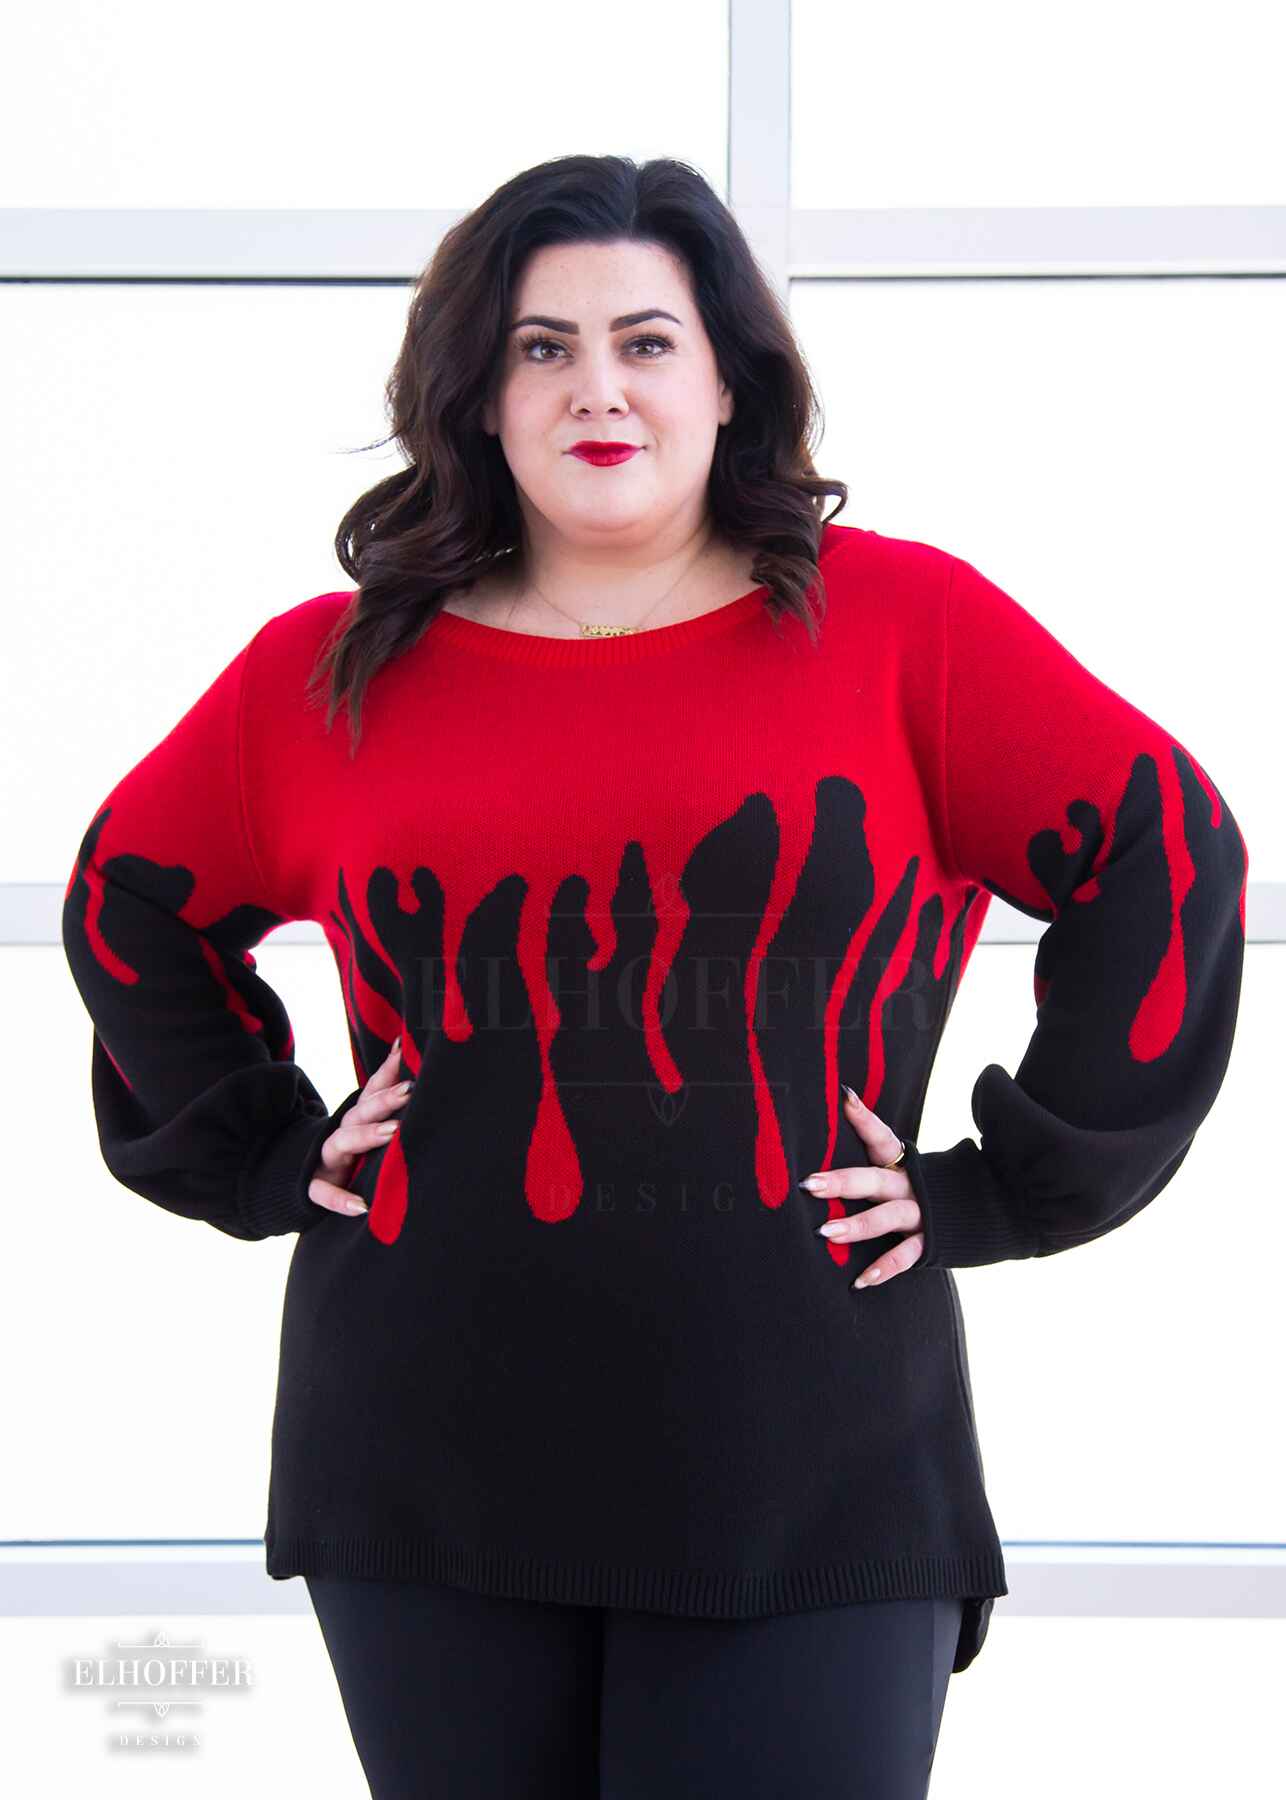 Stacy, a fair skinned XL model with shoulder length wavy dark brown hair, is wearing an oversize sweater with a bright red blood drip design that looks like it's oozing down onto a black sweater that has long billowing sleeves with thumbholes.